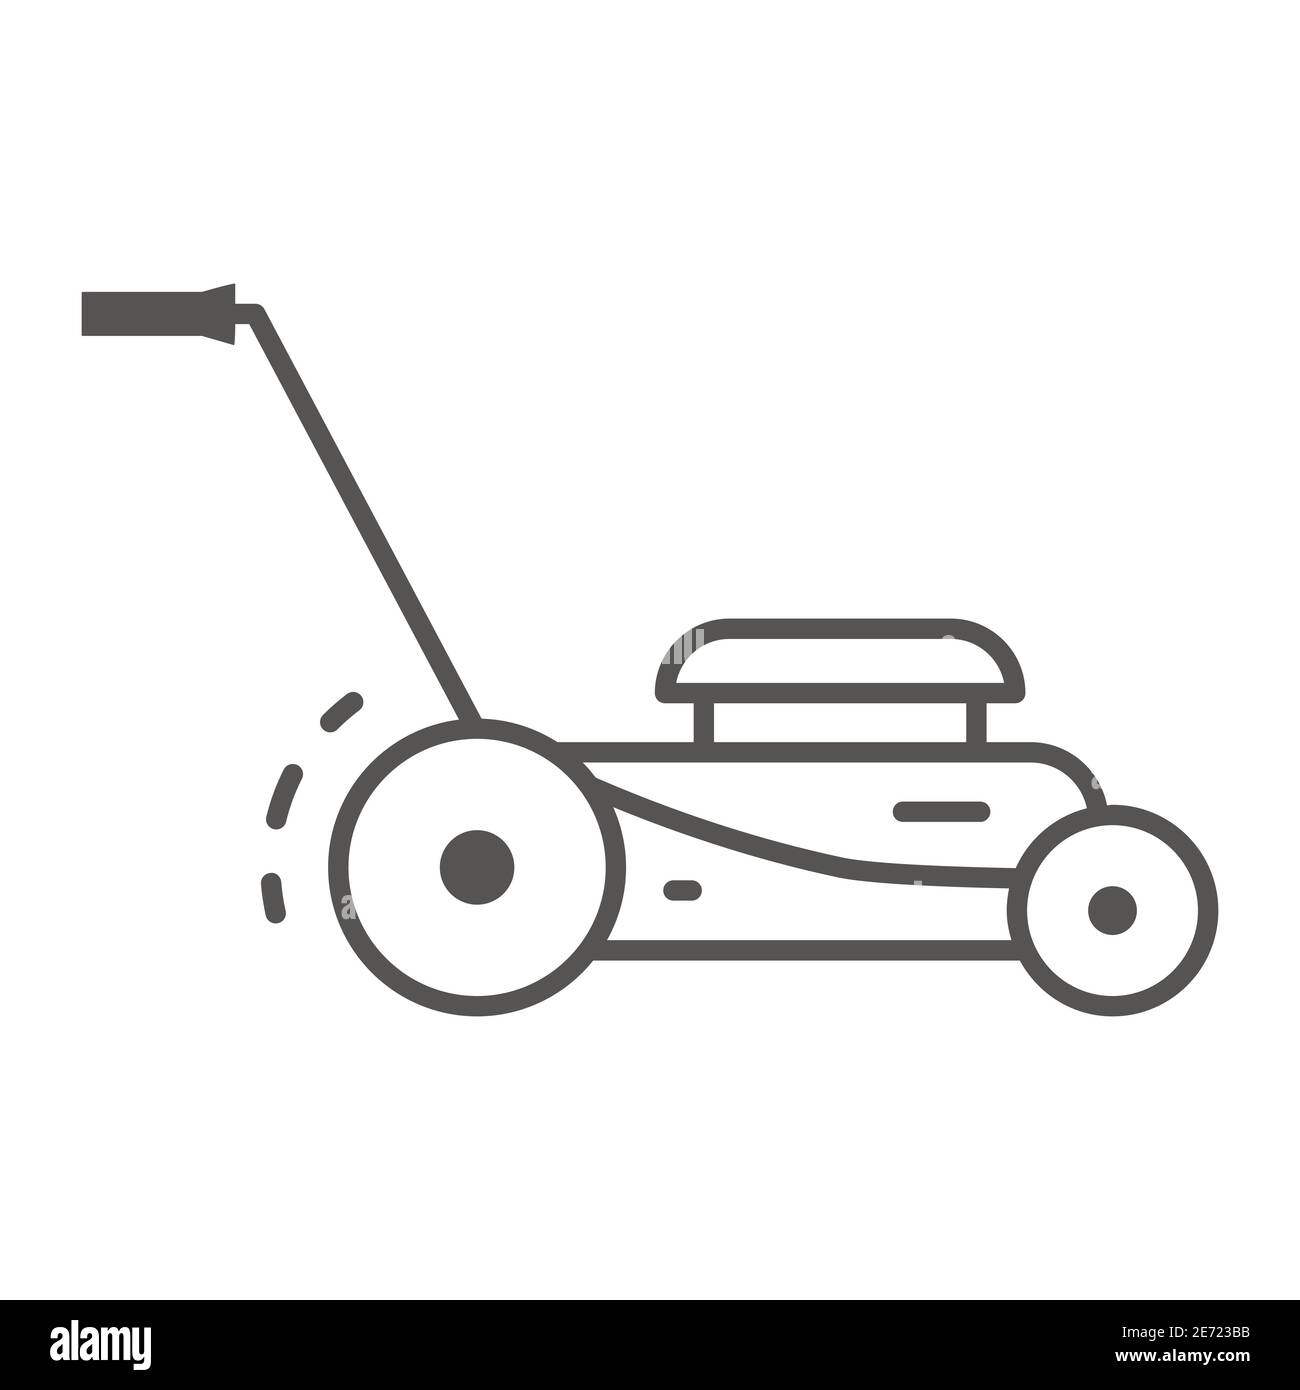 Lawn mower thin line icon, Garden and gardening concept, lawnmower sign on white background, lawn mower icon in outline style for mobile concept and Stock Vector